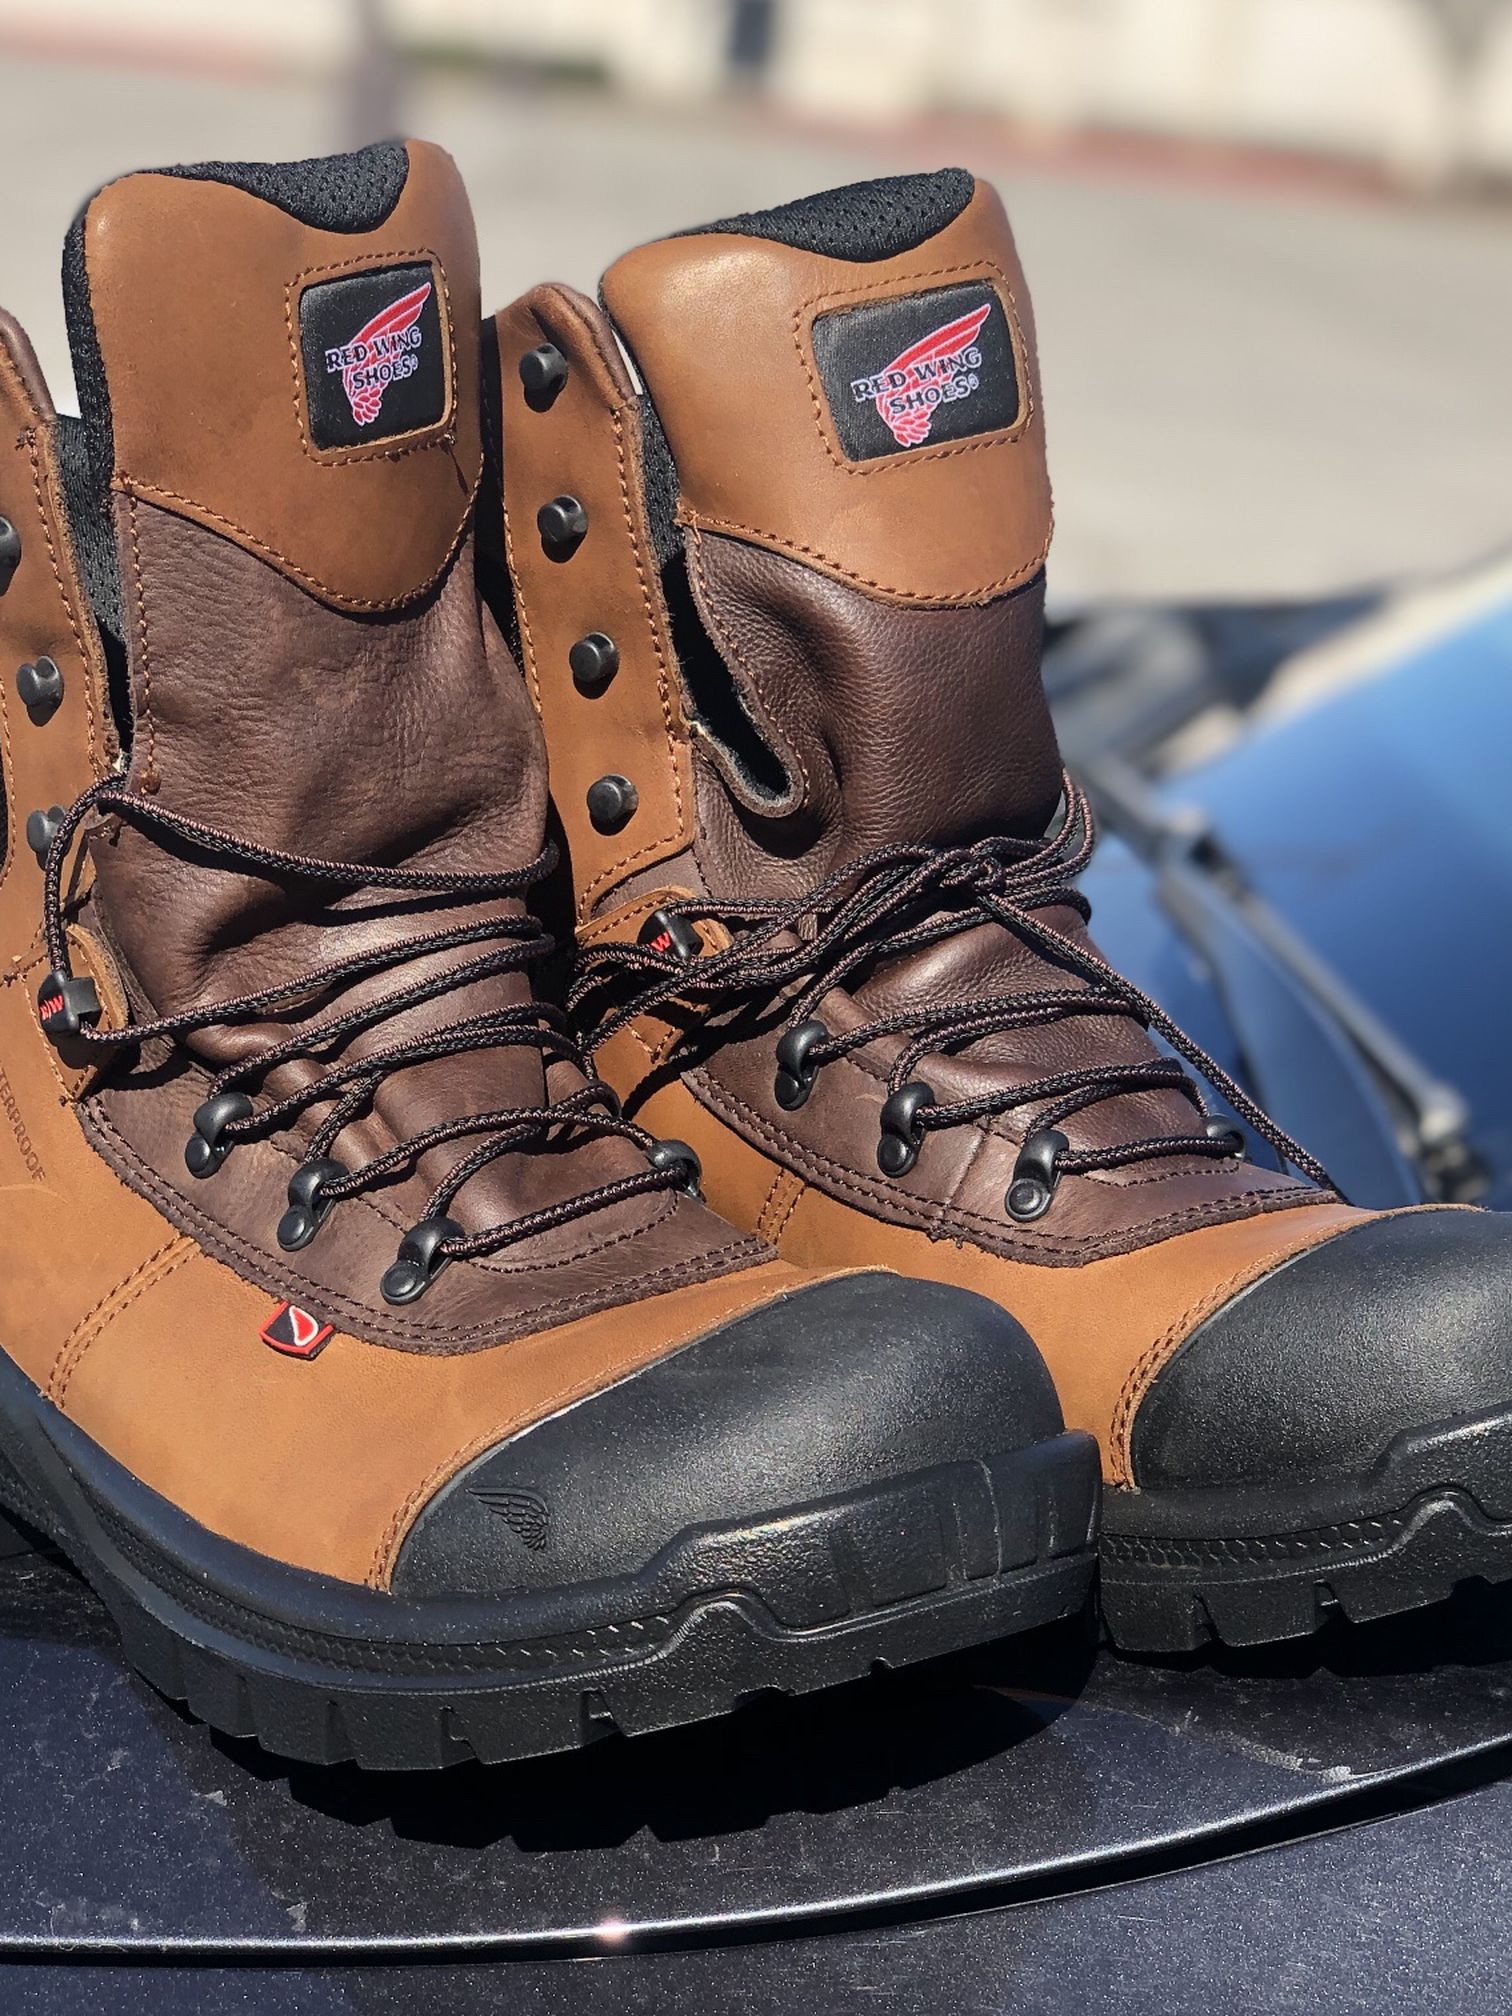 Red Wing Boots 8 Inch Waterproof